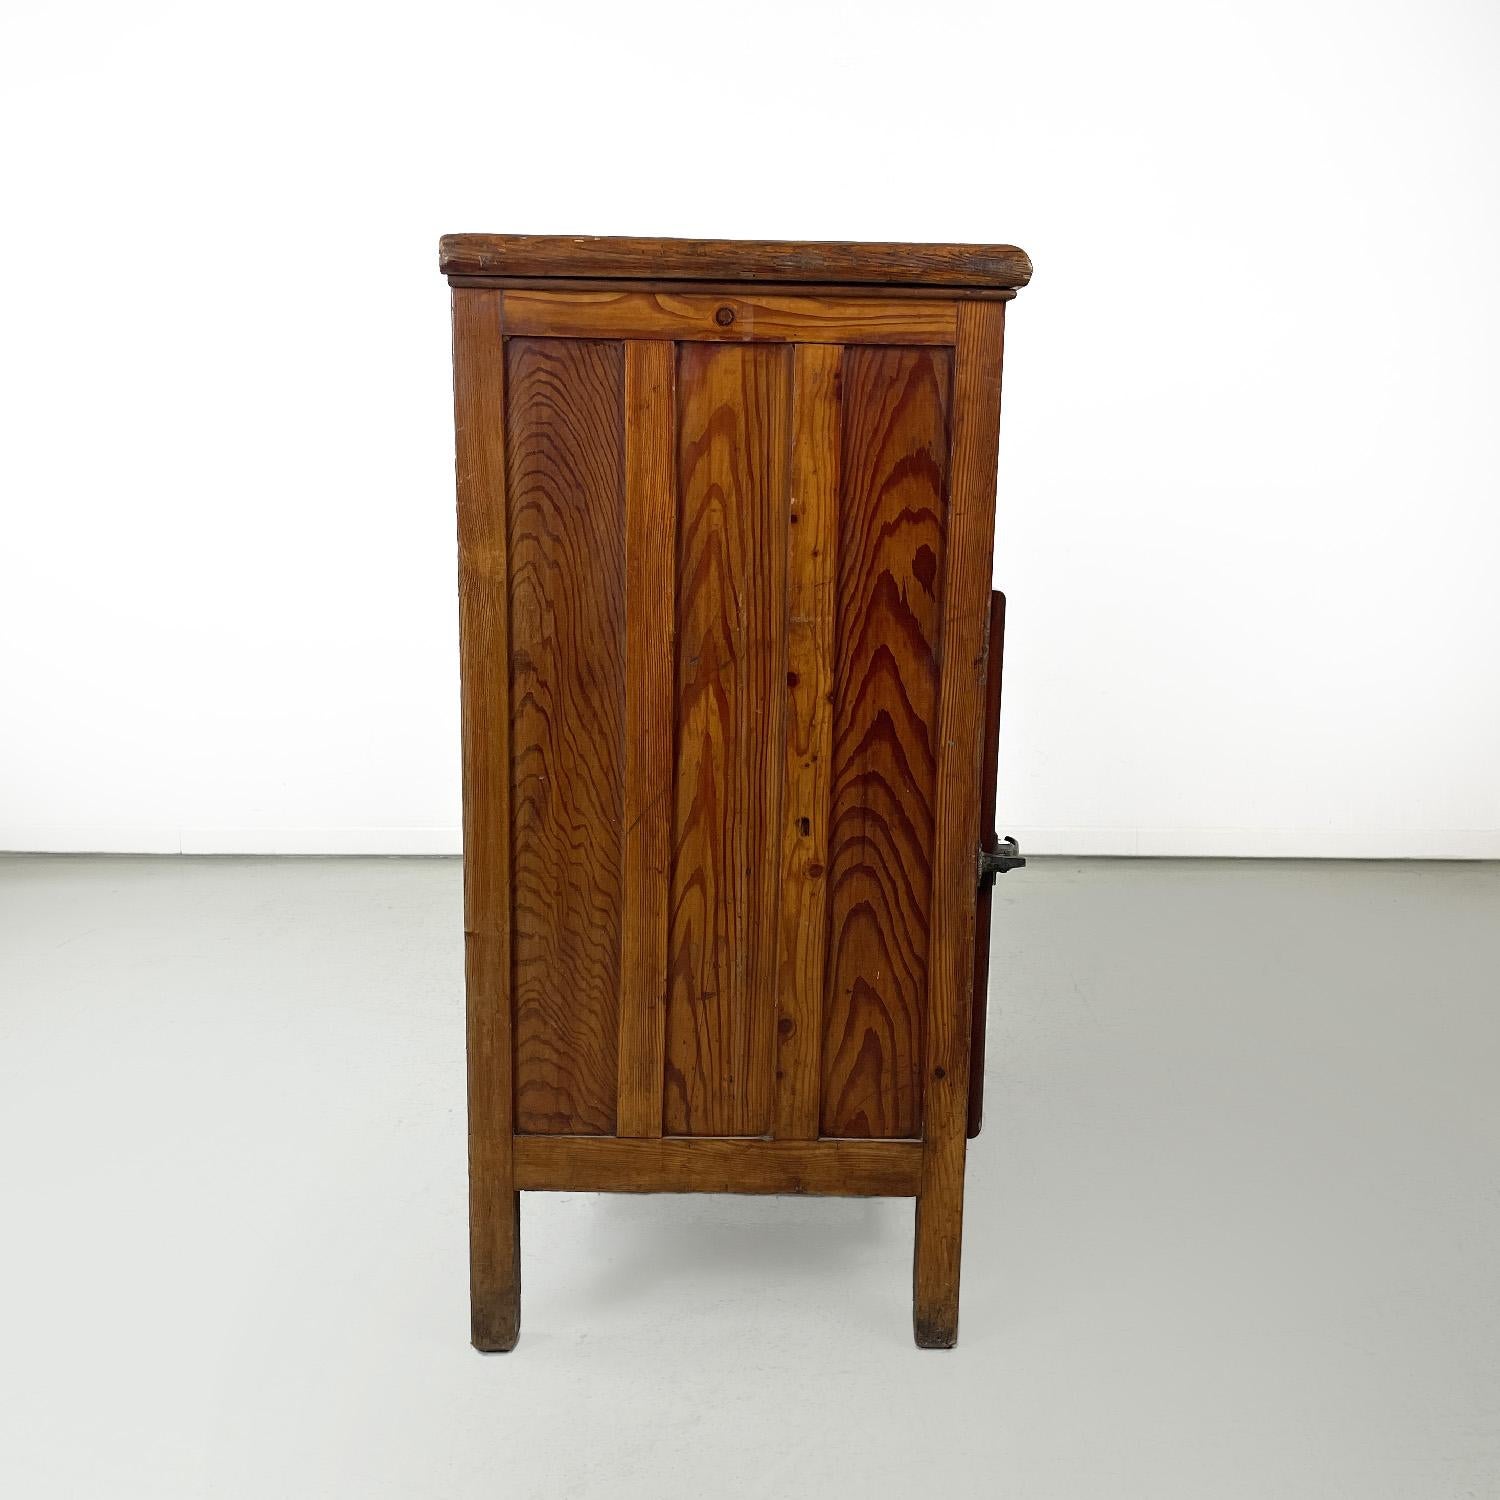 Early 20th Century Italian wooden icebox Stella Polare by G. Saracco Asti, early 1900s For Sale